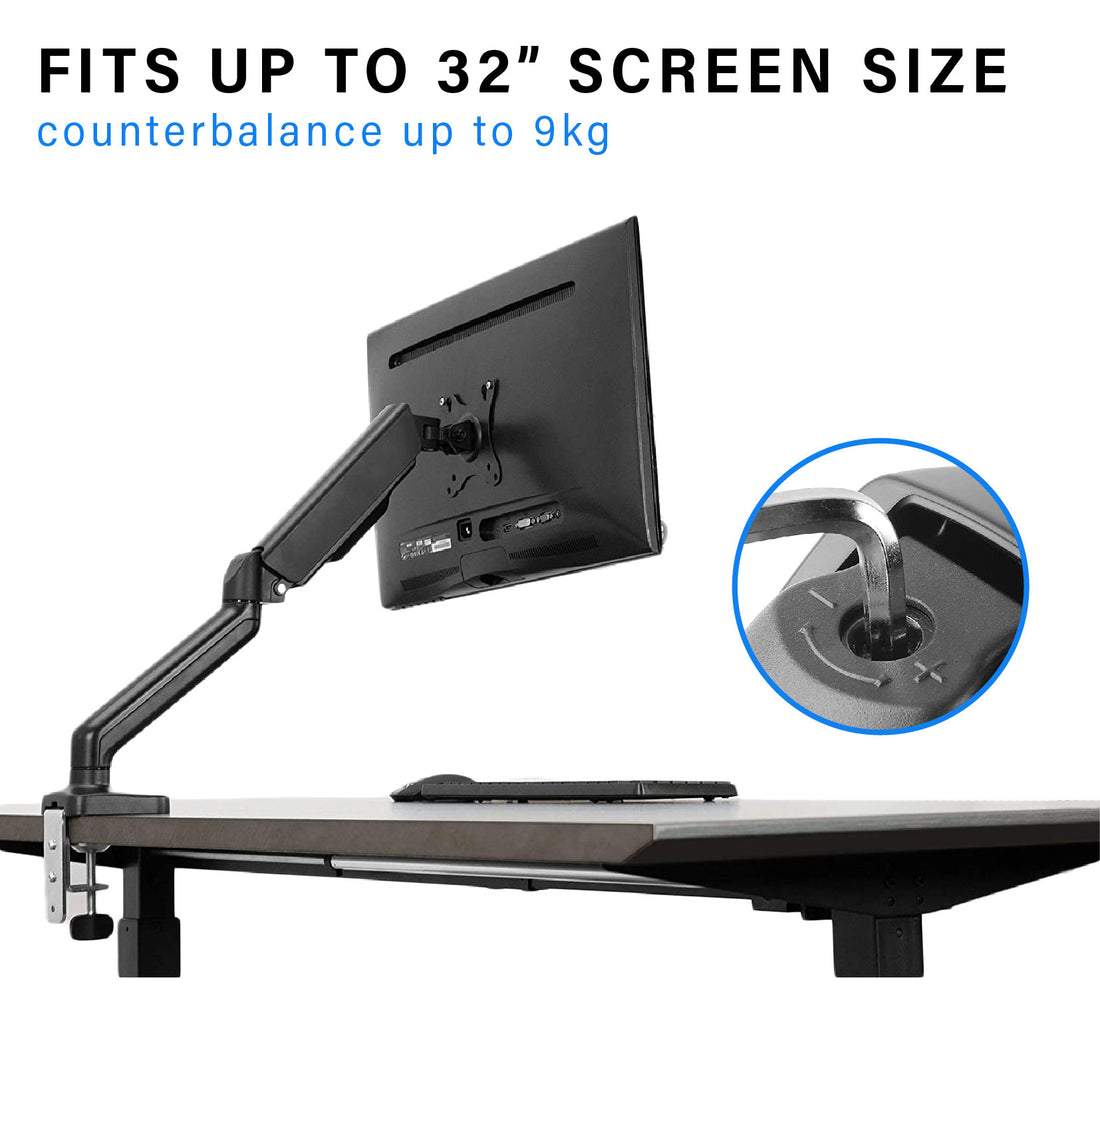 ULTi Verge Gas Spring Monitor Desk Mount, Full Motion Swivel Monitor Arm, VESA Stand with C Clamp, Grommet Mounting, Up to 32&